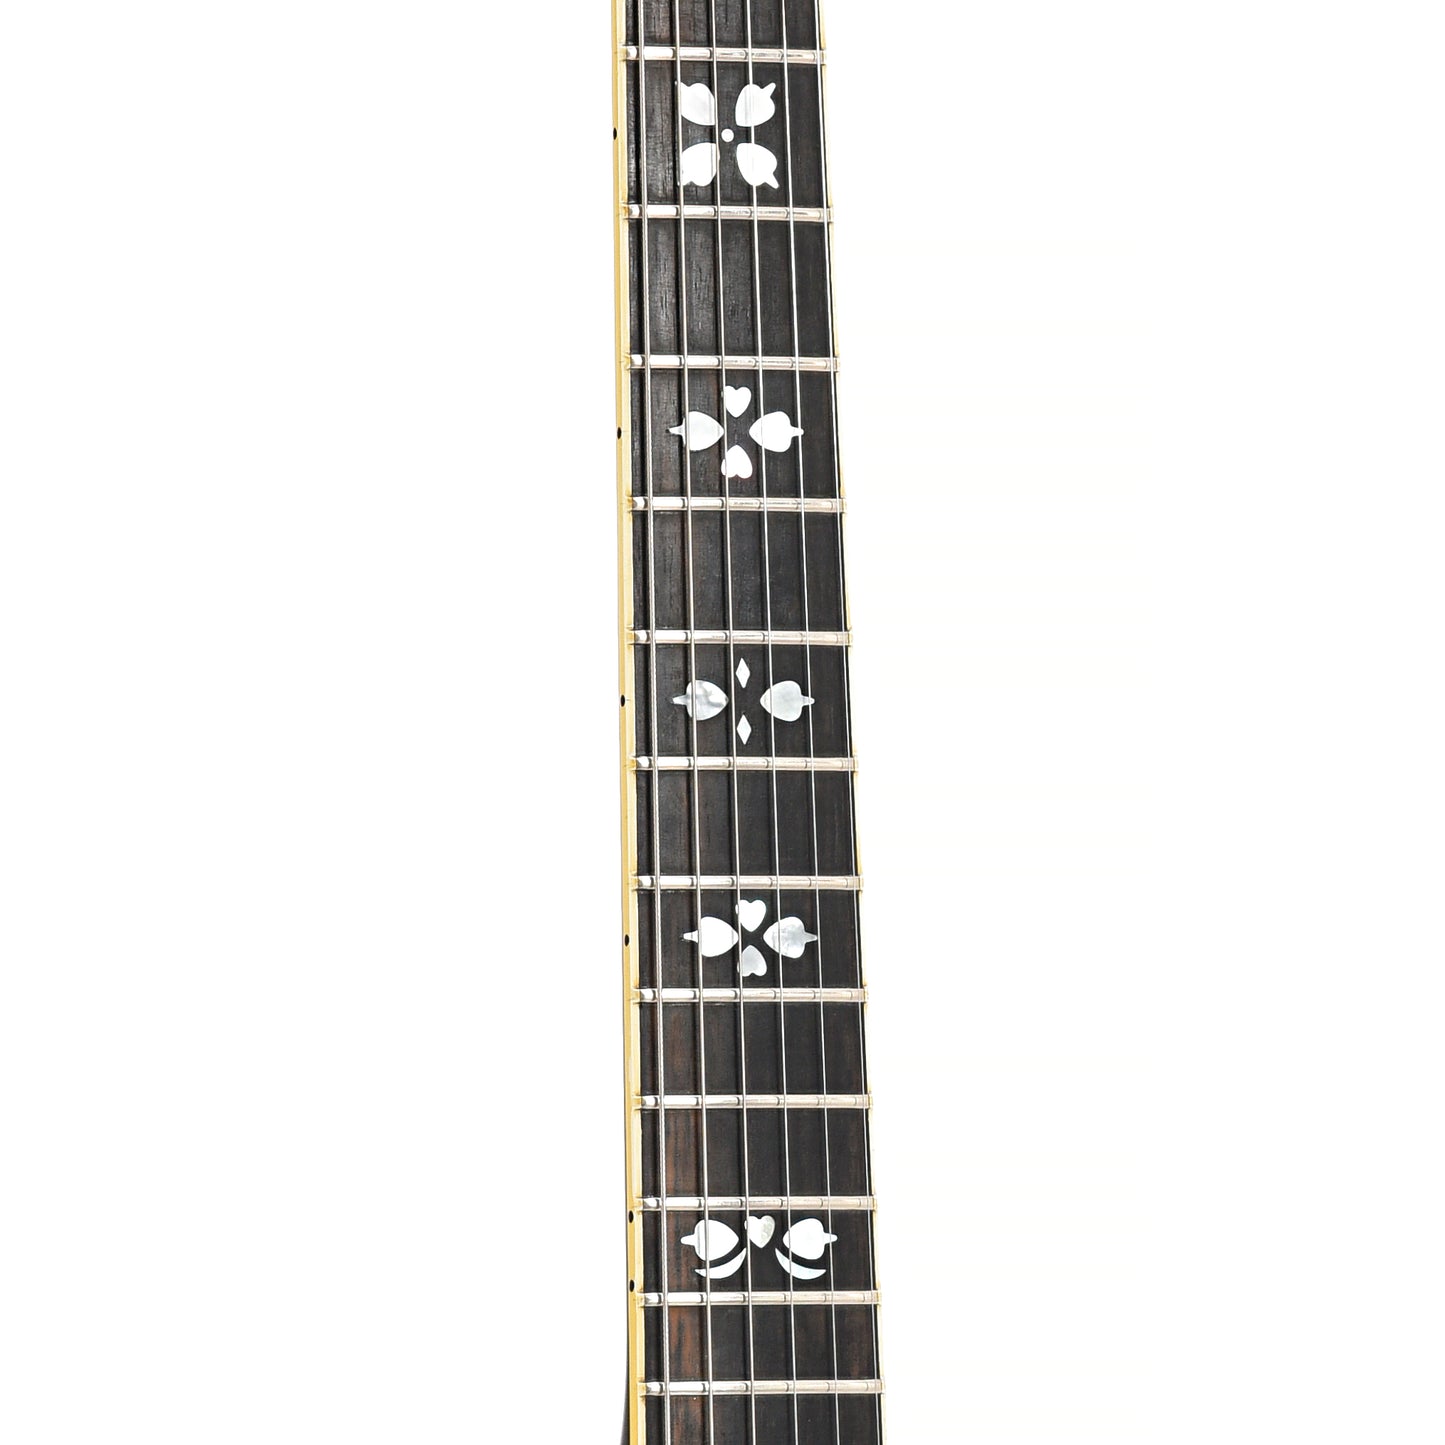 Fretboard of Gibson Les Paul Artisan Electric 